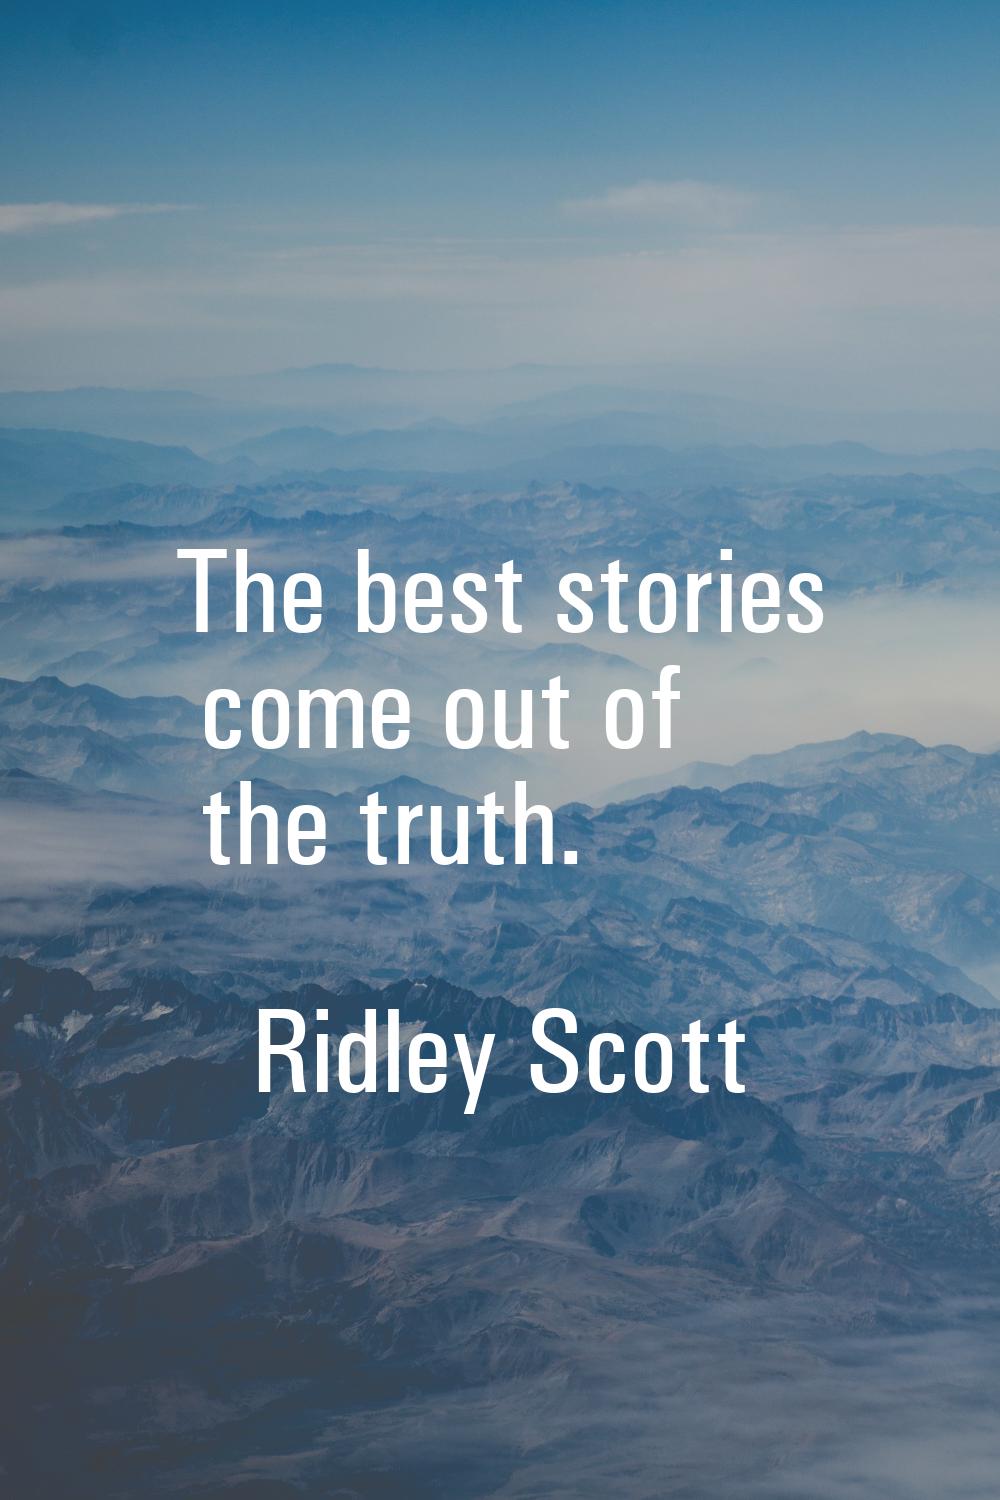 The best stories come out of the truth.